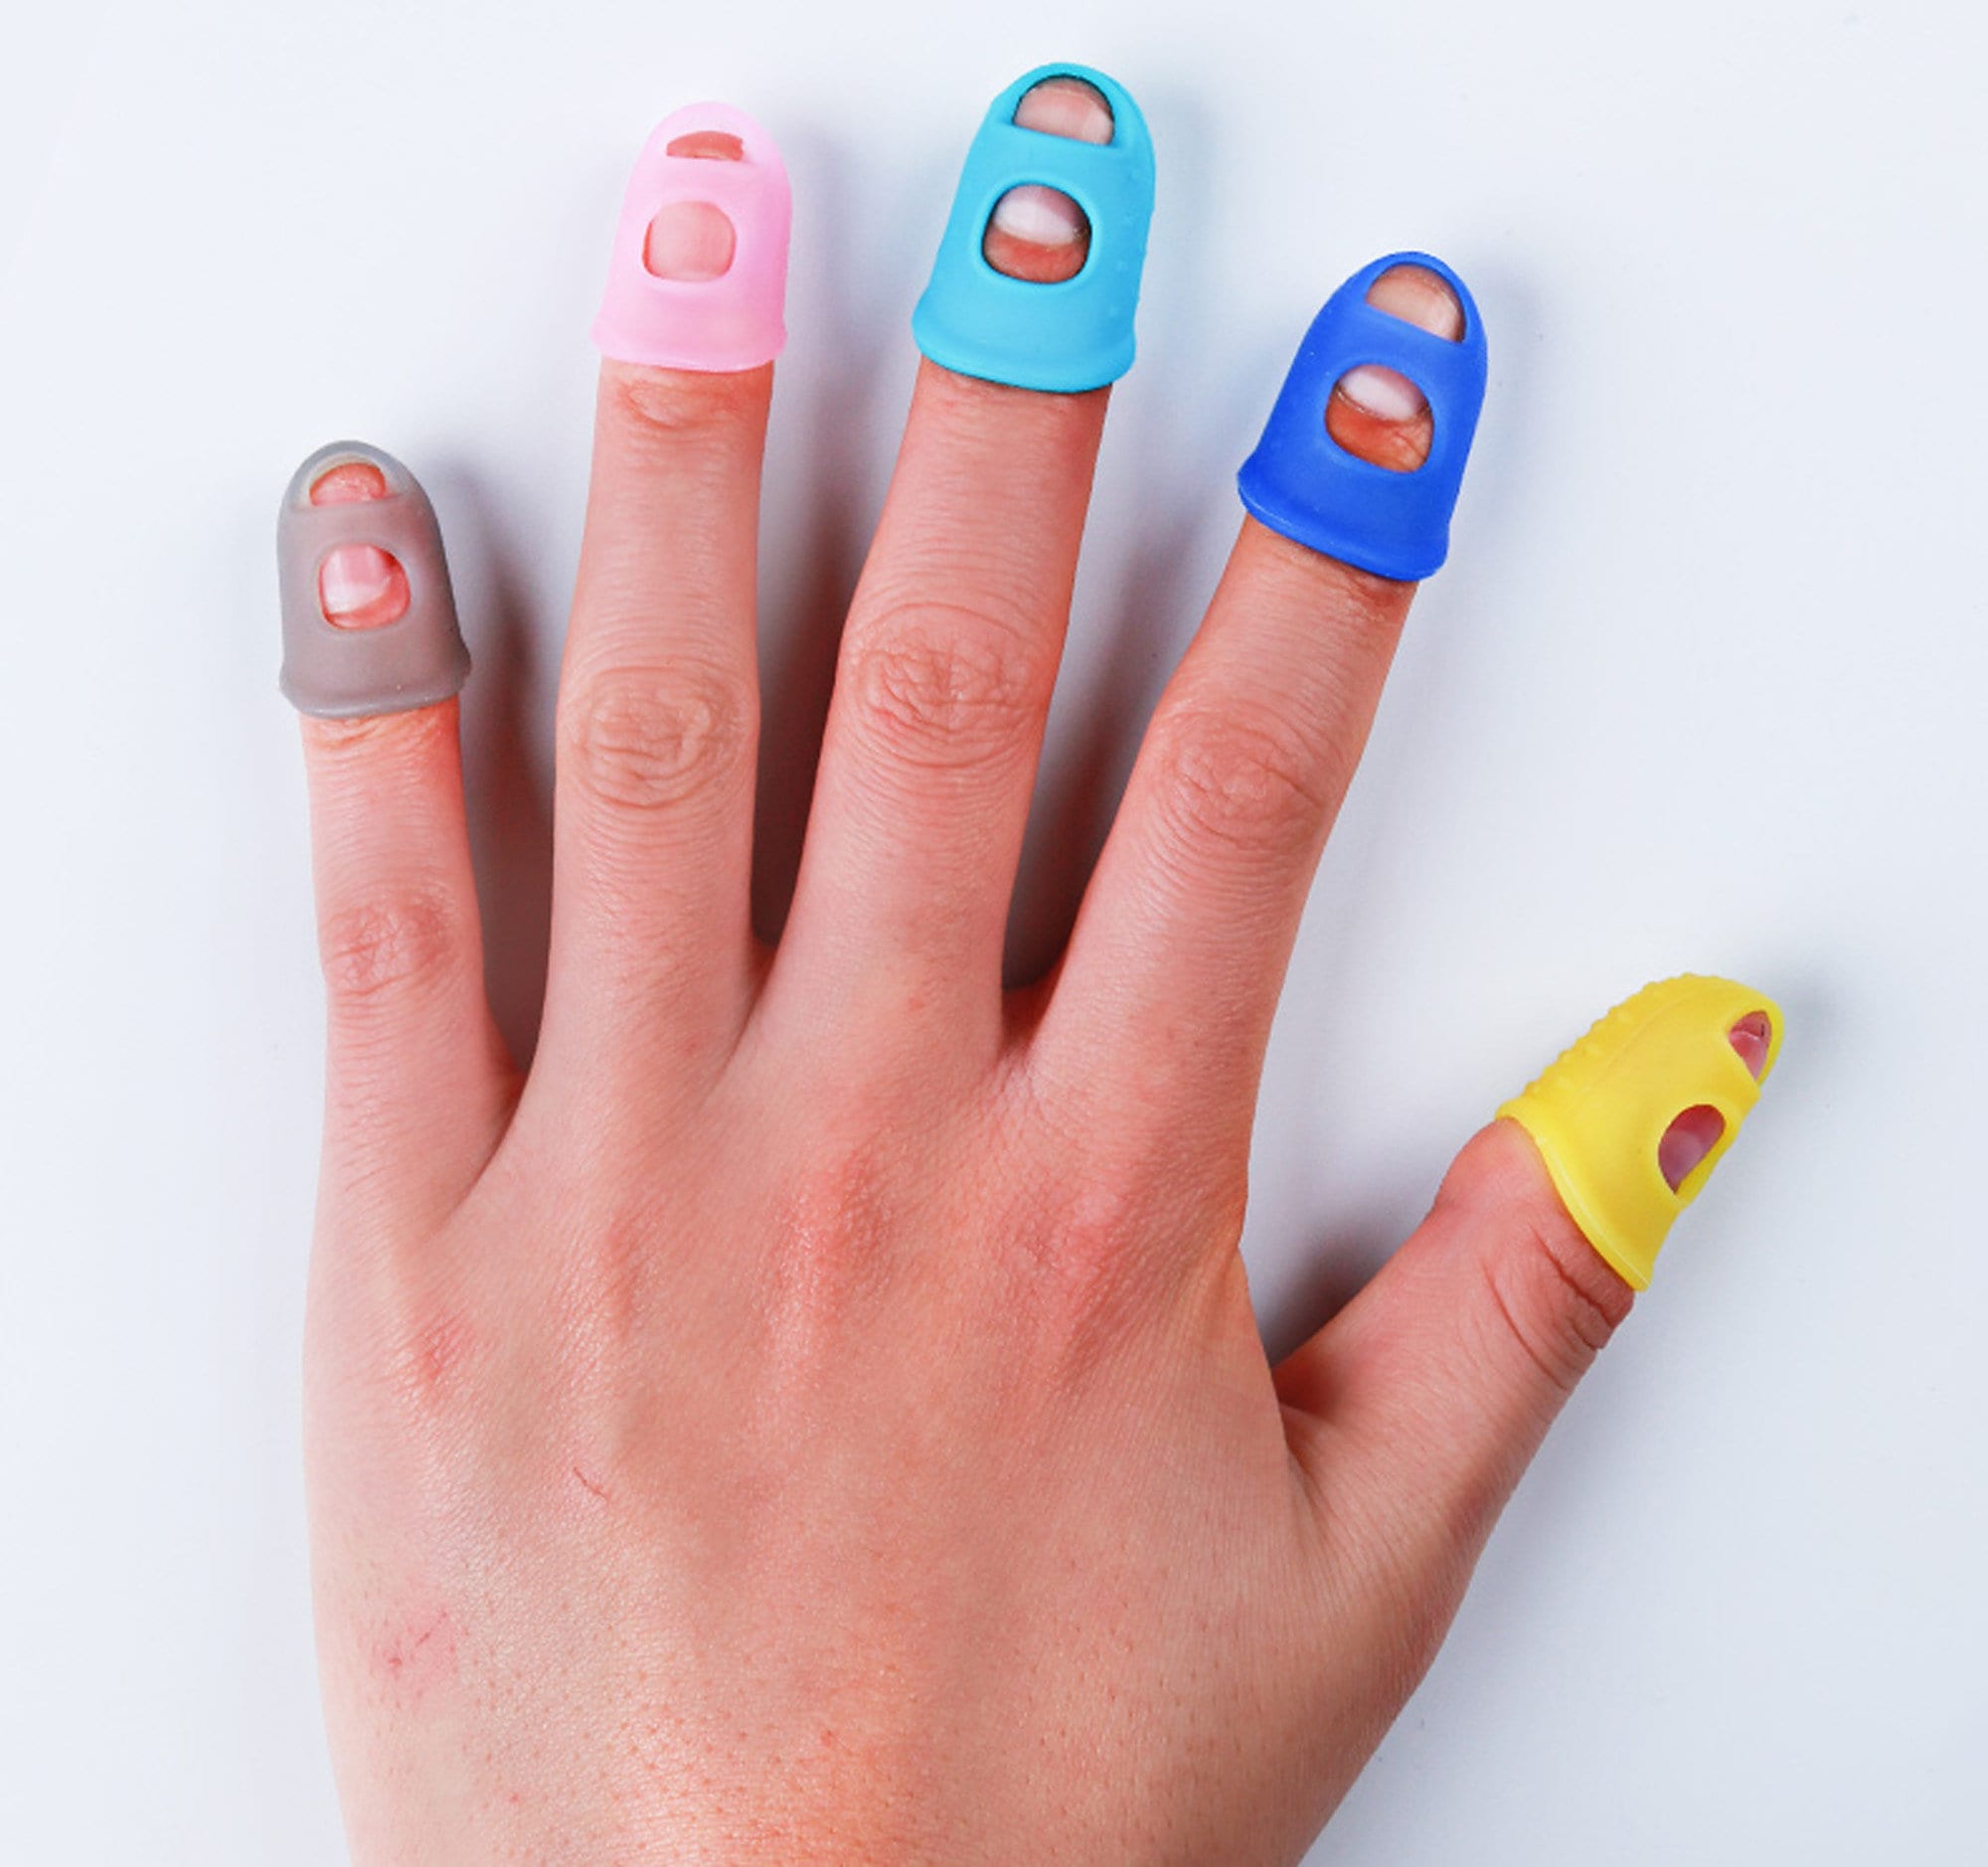 Silicone Finger Tips Elastic Protector Cover Anti-Burn Craft-work